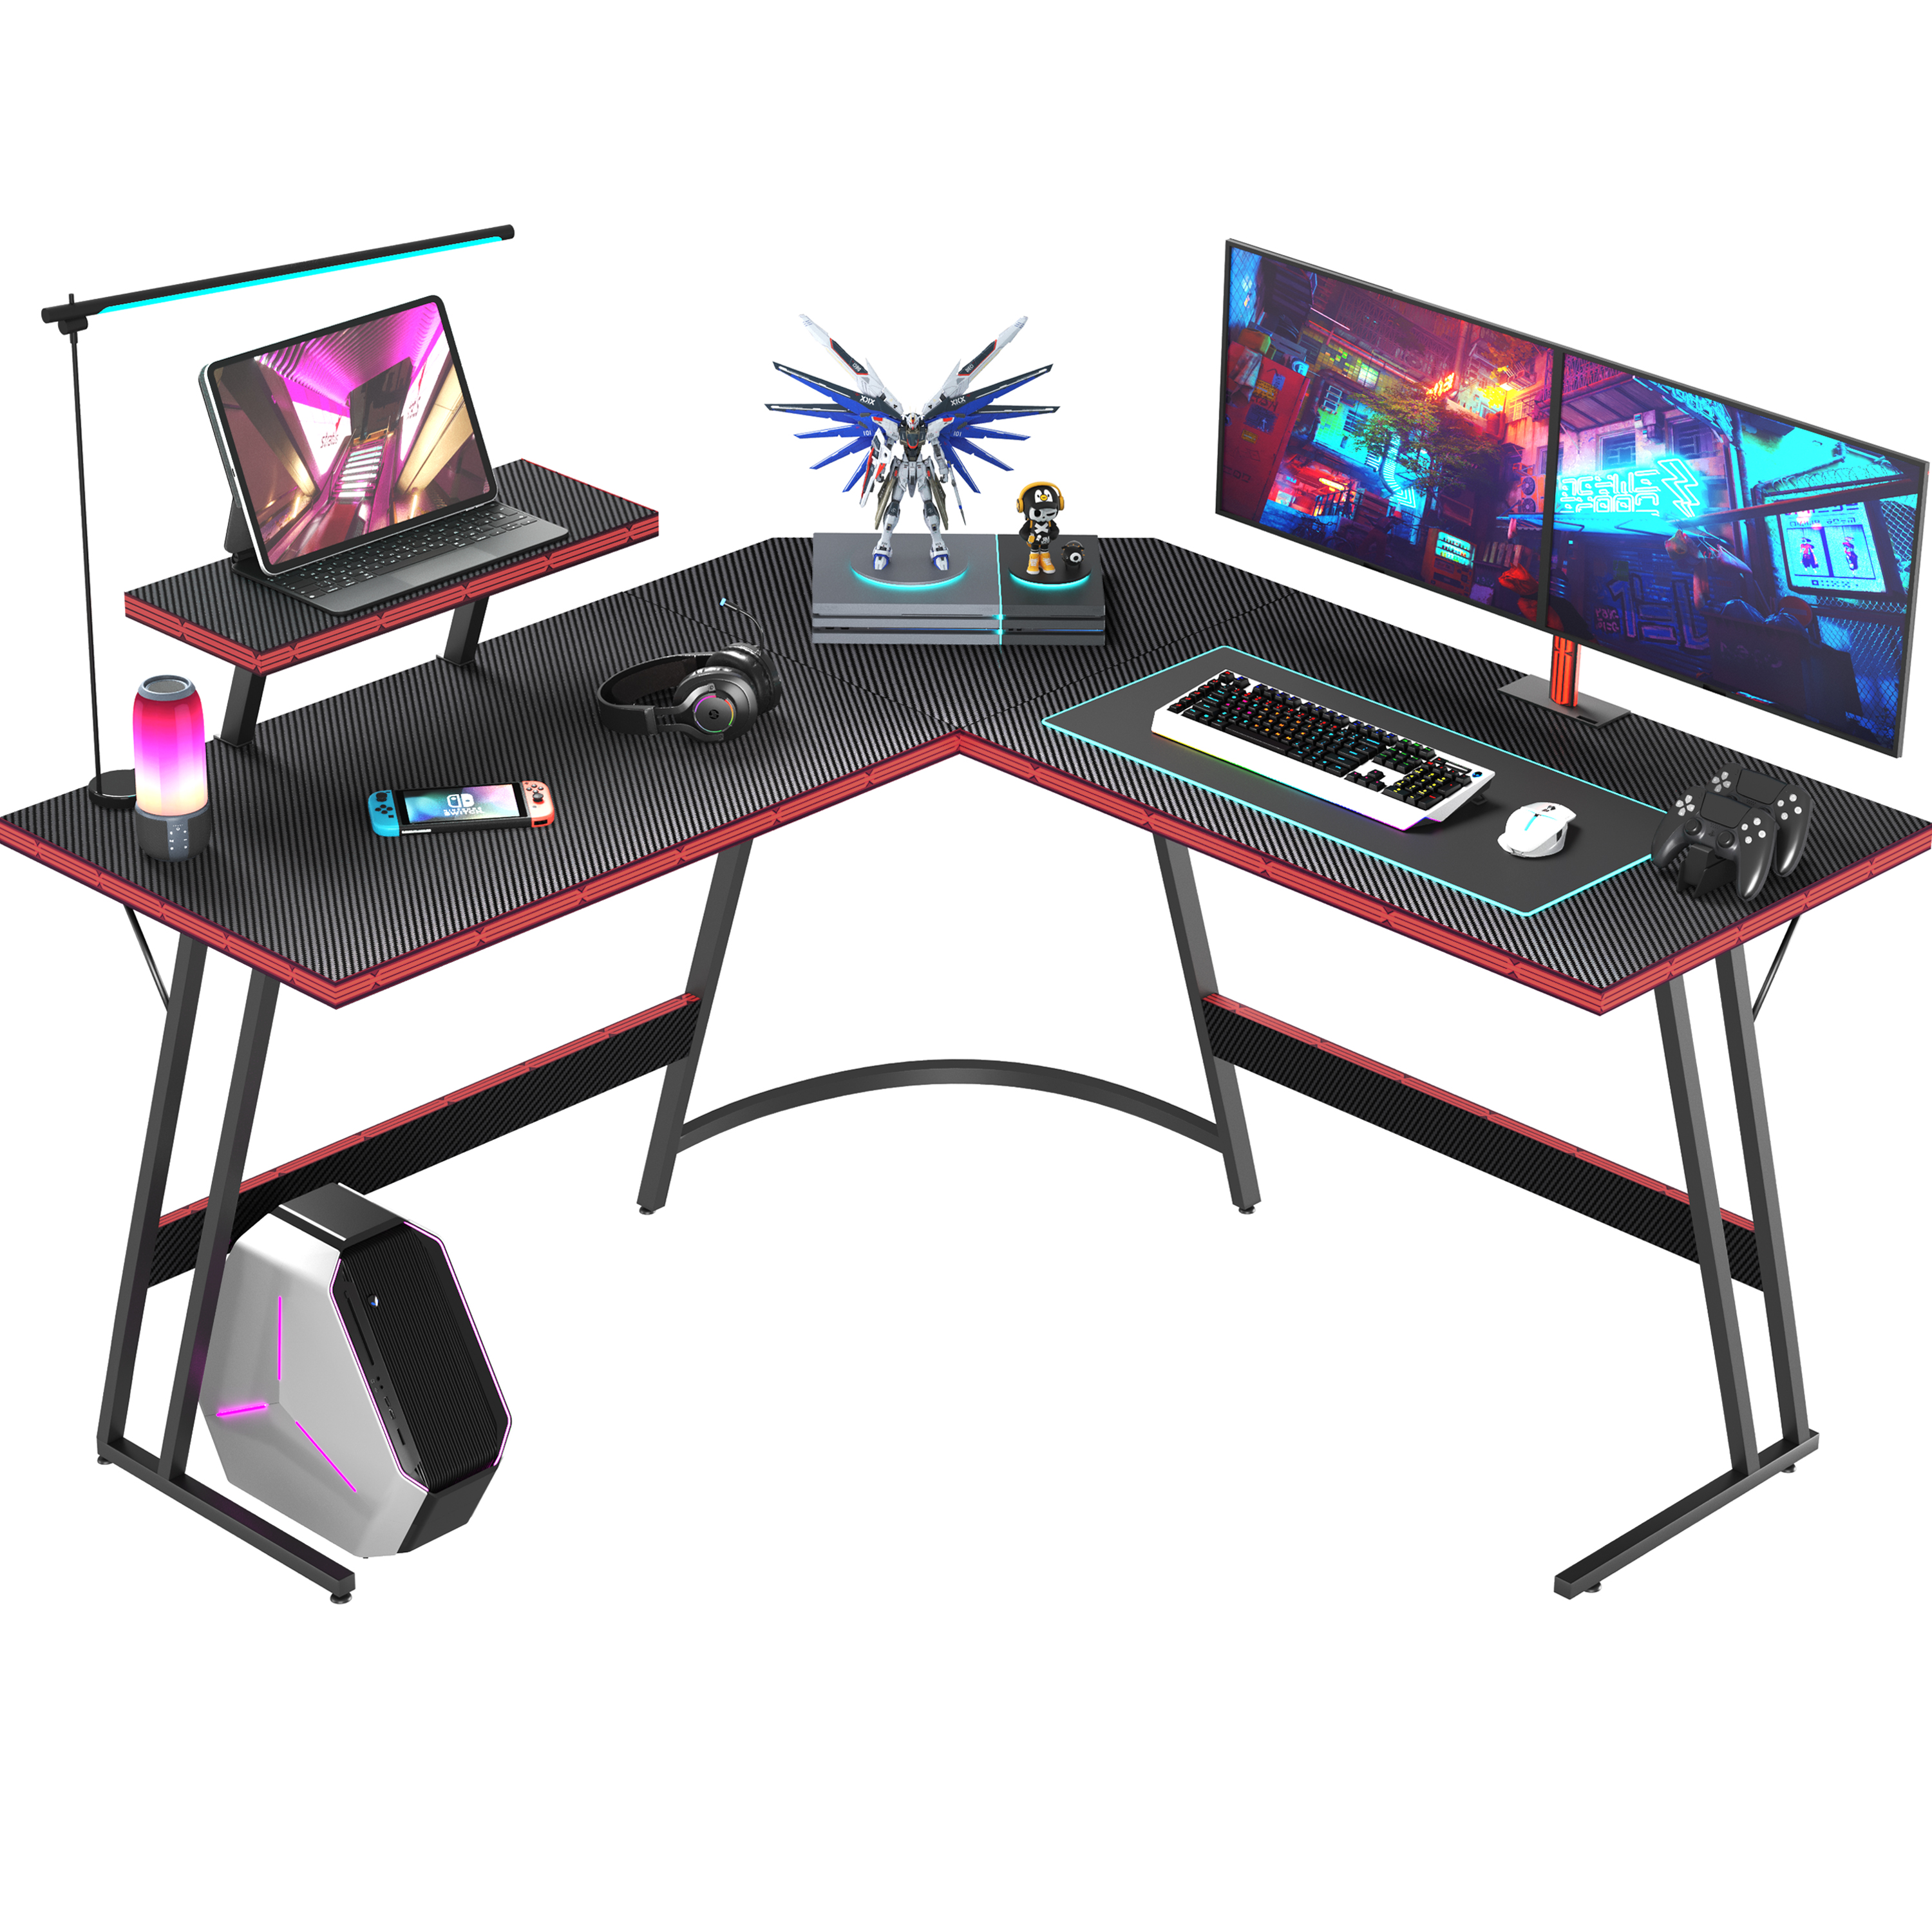 Homall L-Shaped Gaming Desk 51 Inches Corner Office Desk with Removable Monitor Riser, Black - image 1 of 9